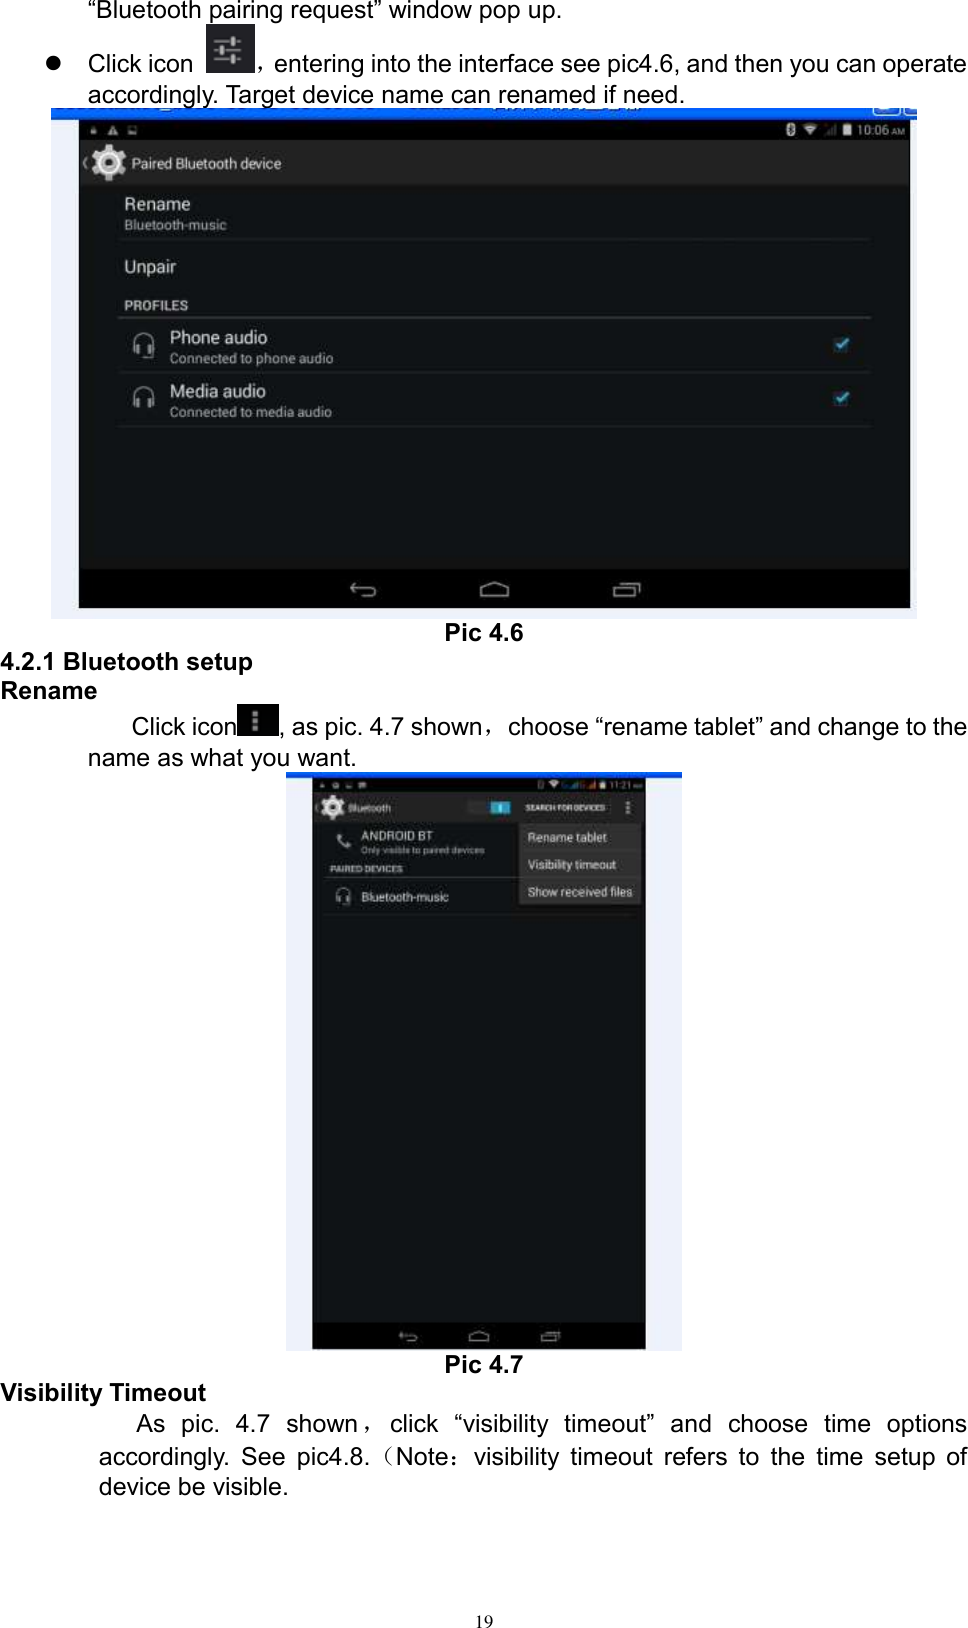      19 “Bluetooth pairing request” window pop up.     Click icon  ，entering into the interface see pic4.6, and then you can operate accordingly. Target device name can renamed if need.    Pic 4.6 4.2.1 Bluetooth setup Rename Click icon , as pic. 4.7 shown，choose “rename tablet” and change to the name as what you want.    Pic 4.7 Visibility Timeout As  pic.  4.7  shown，click  “visibility  timeout”  and  choose  time  options accordingly.  See pic4.8.（Note：visibility timeout refers to  the time setup of device be visible.   